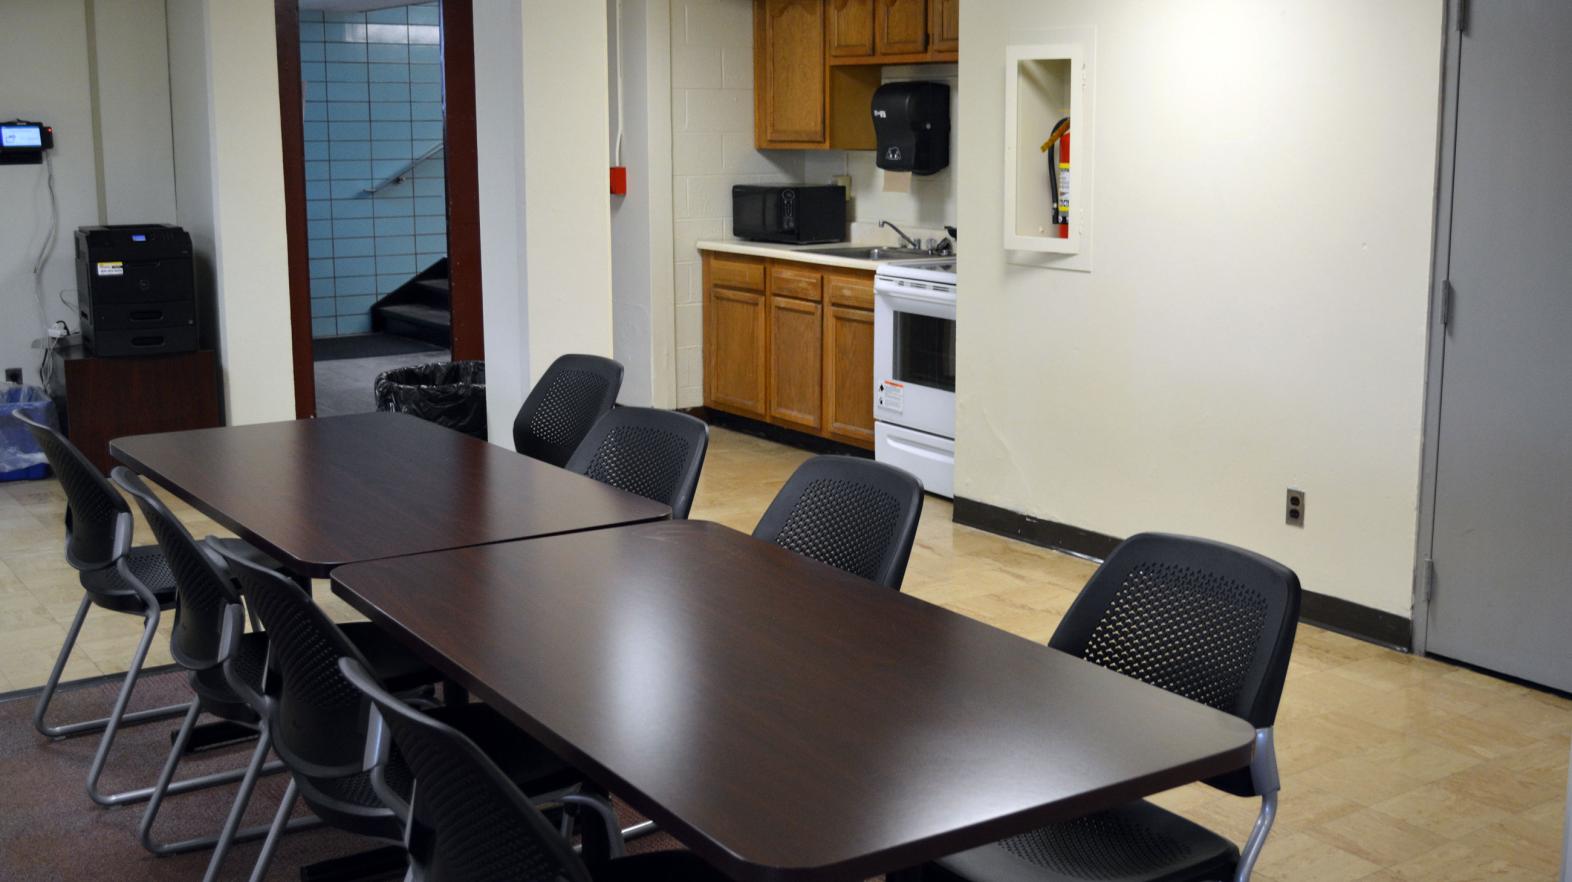 The common area, including kitchen, in Massasoit residence hall.